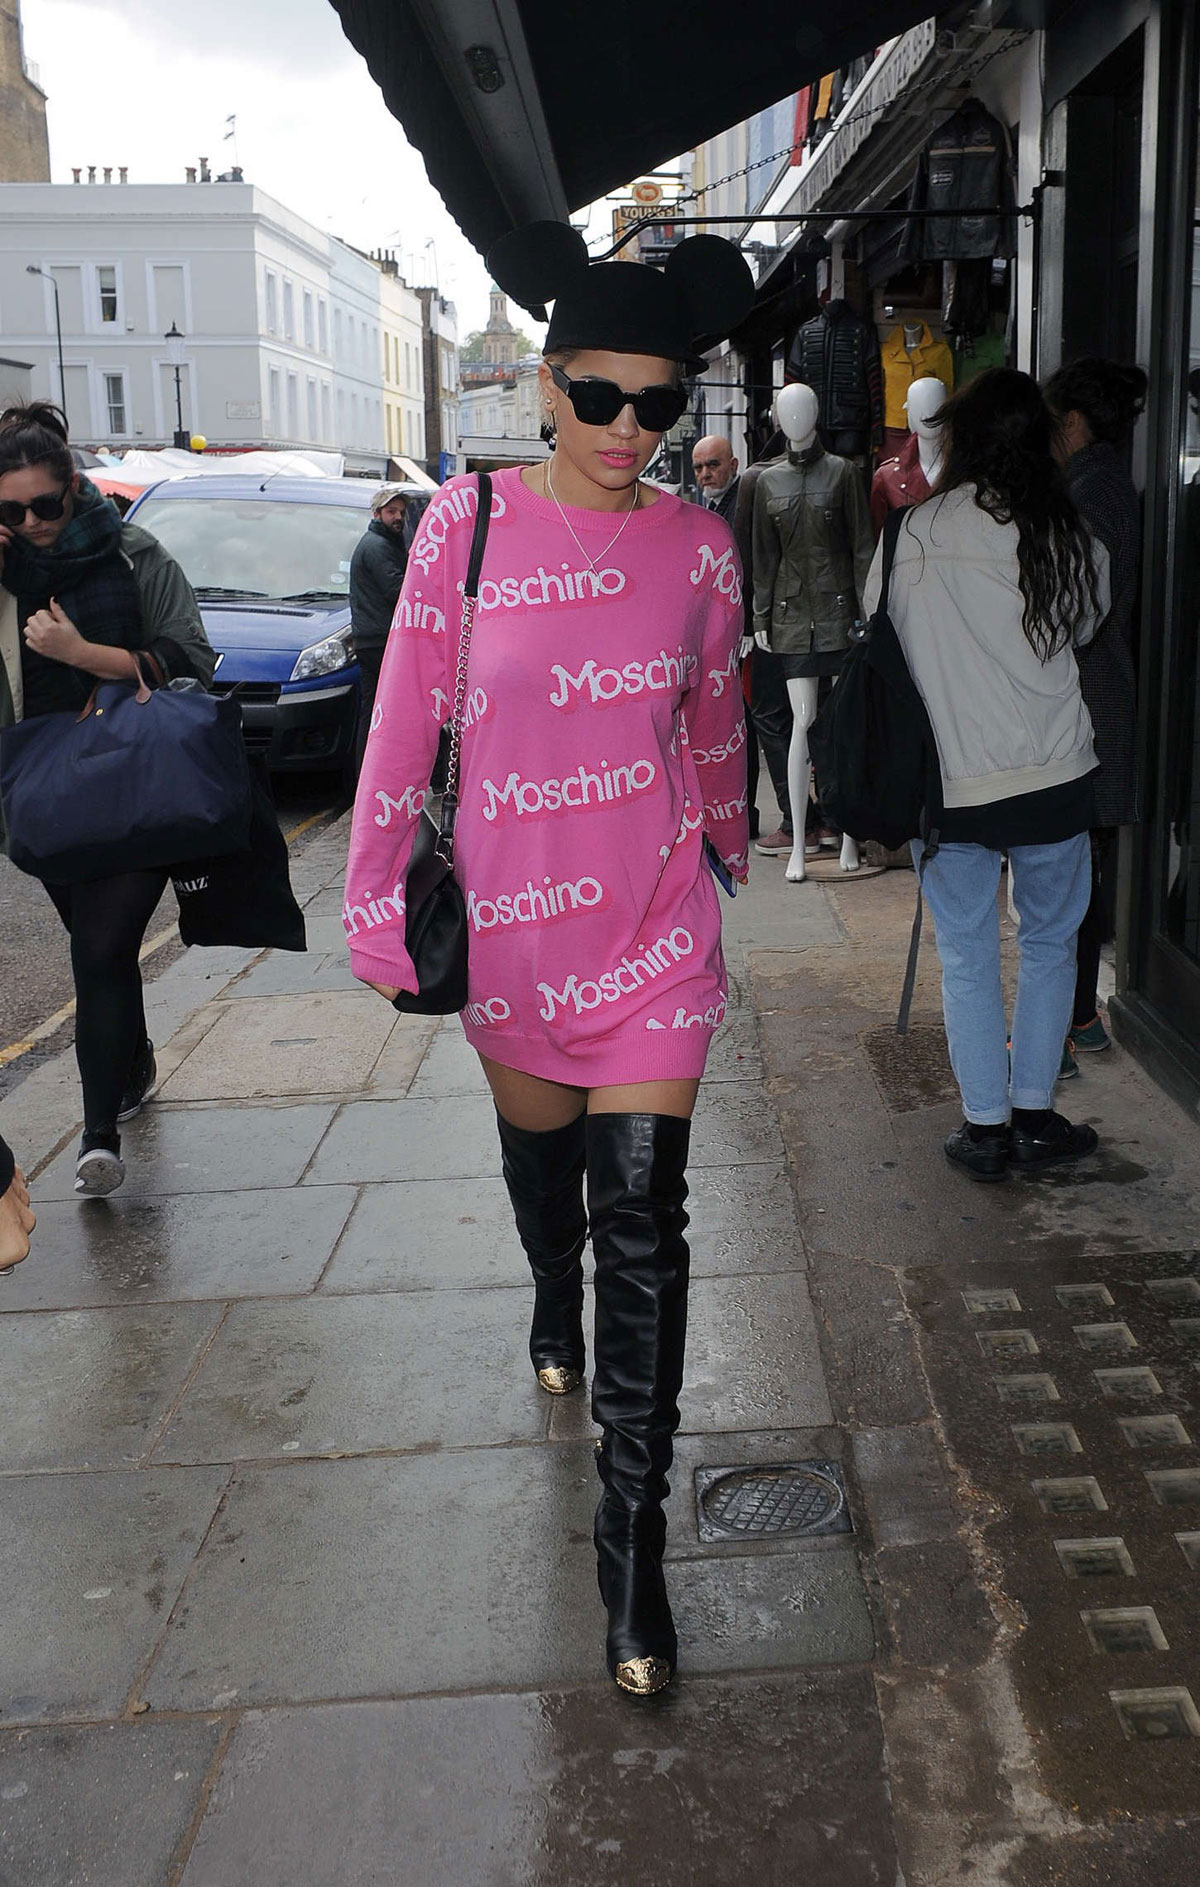 Rita Ora was seen at Electric Cinema in Notting Hill for a business meeting